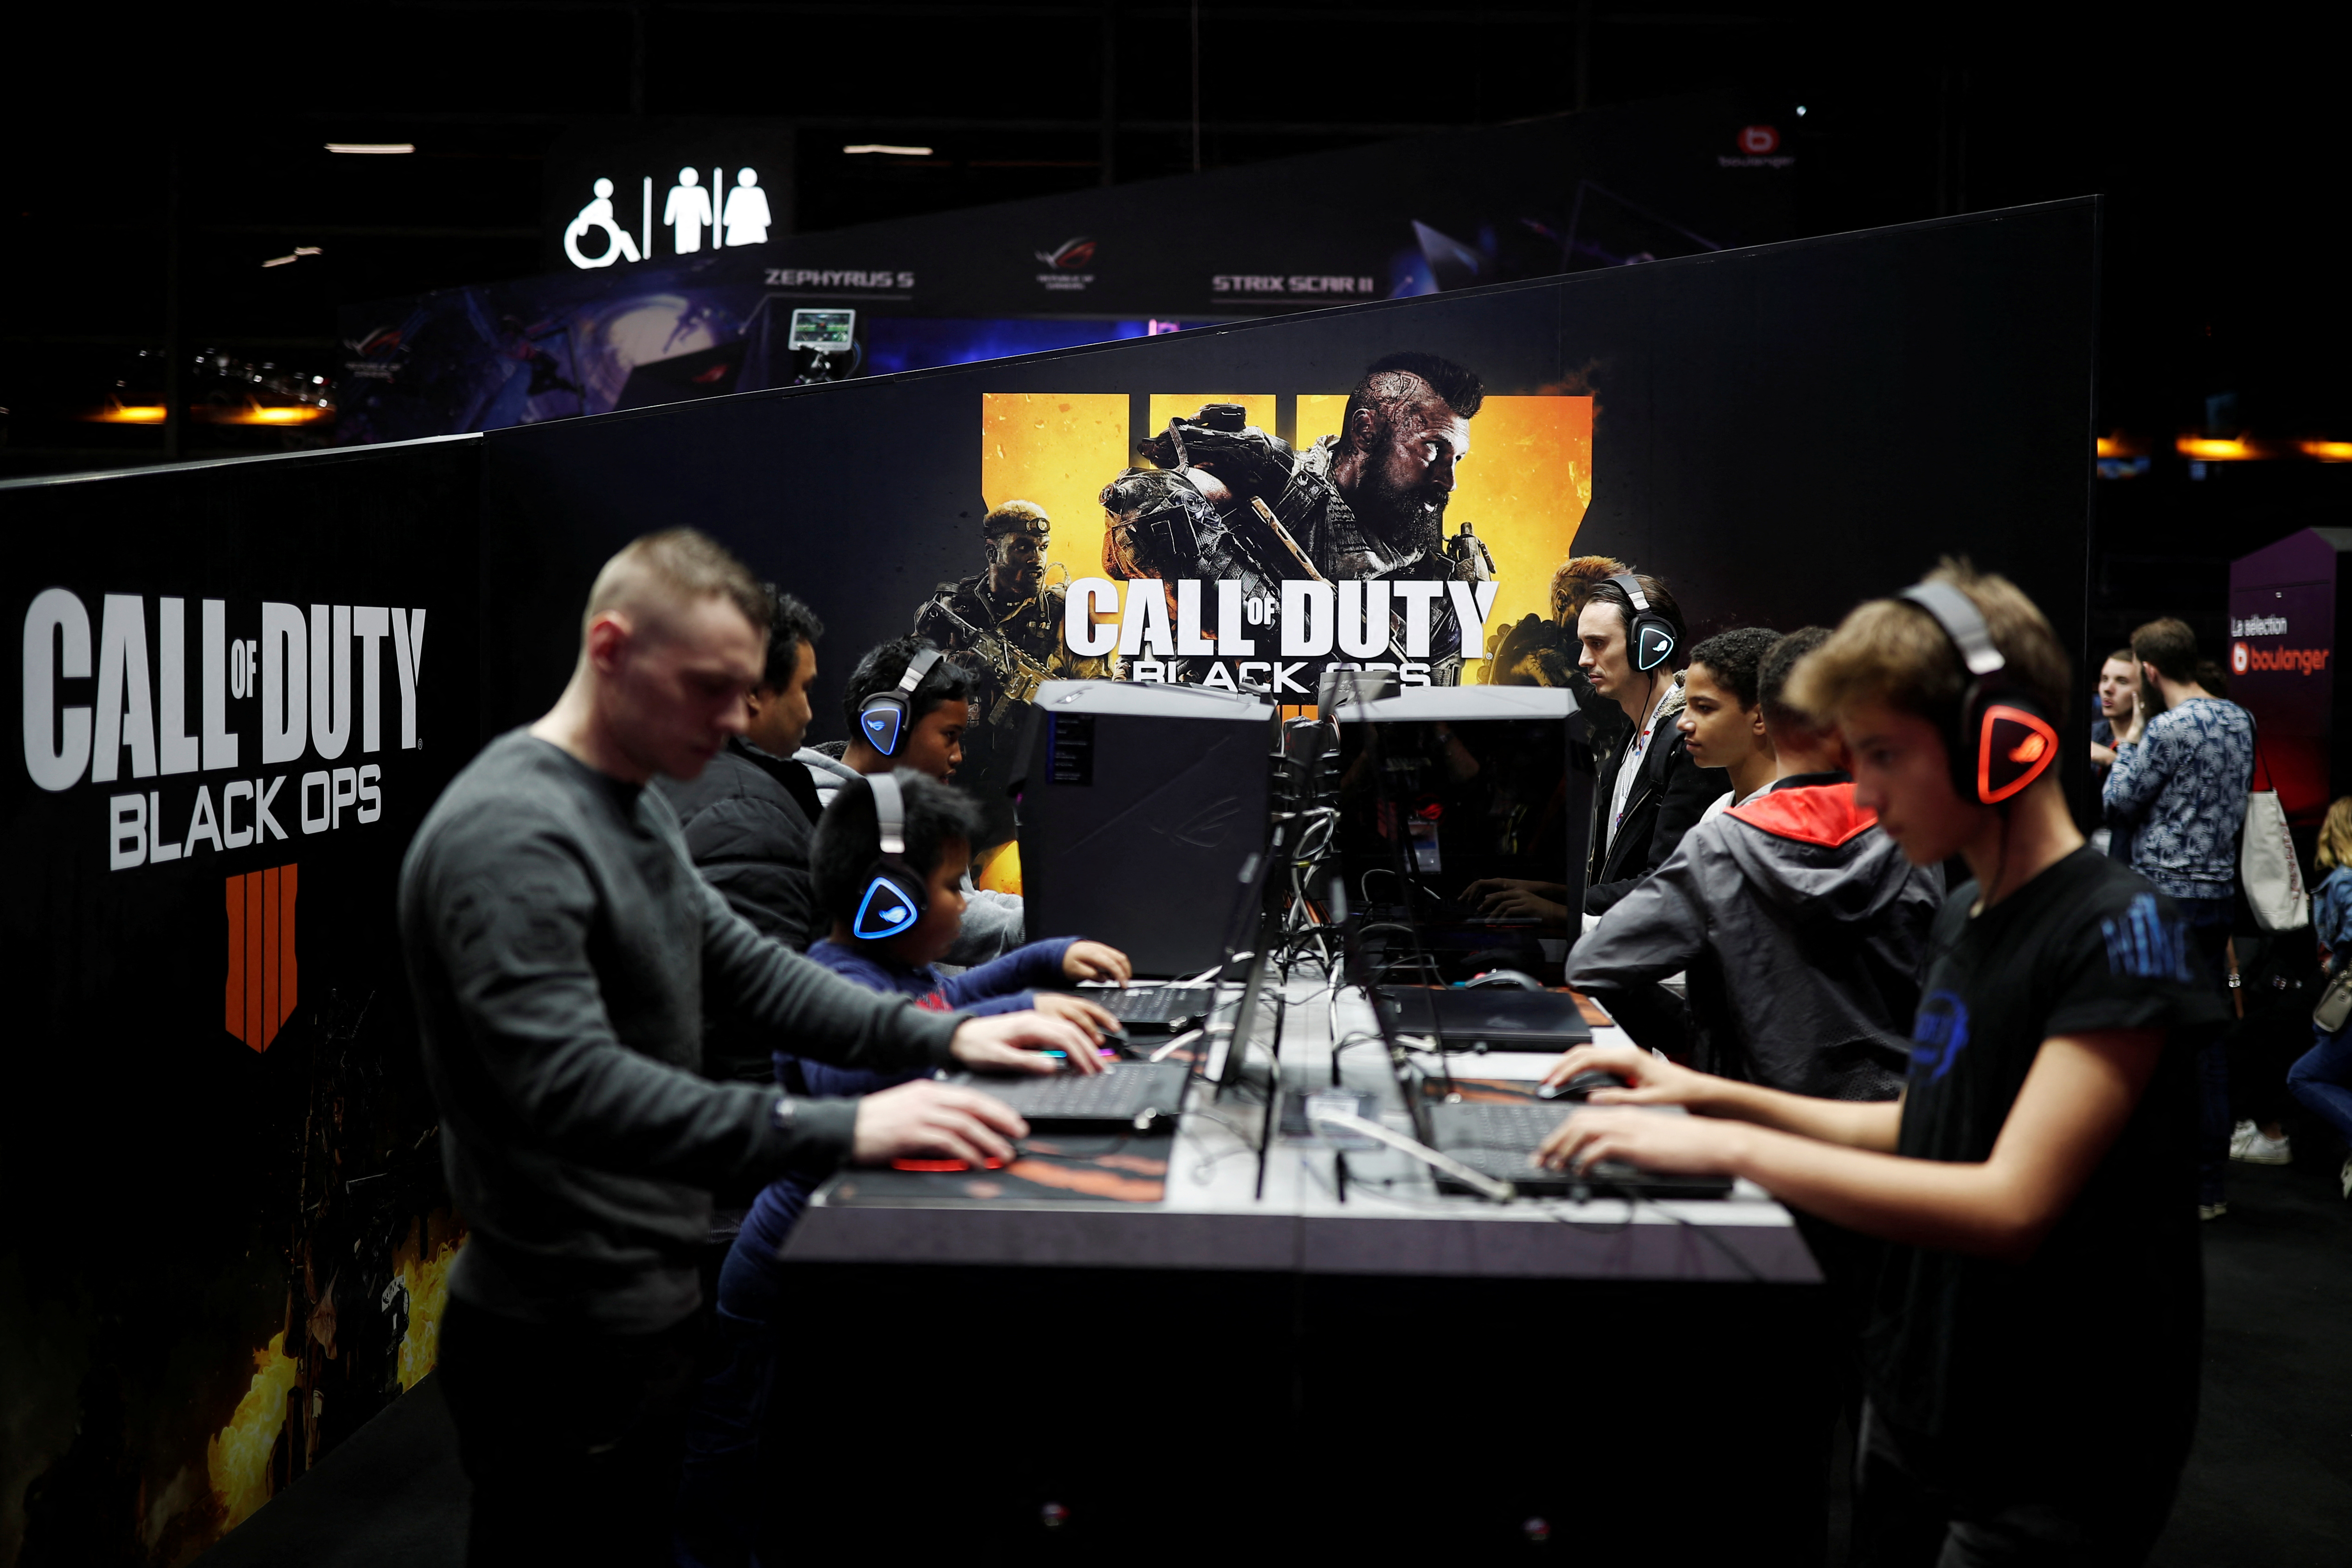 Gamers play Call of Duty: Black Ops 4 at the Paris Games Week (PGW), a trade fair for video games in Paris